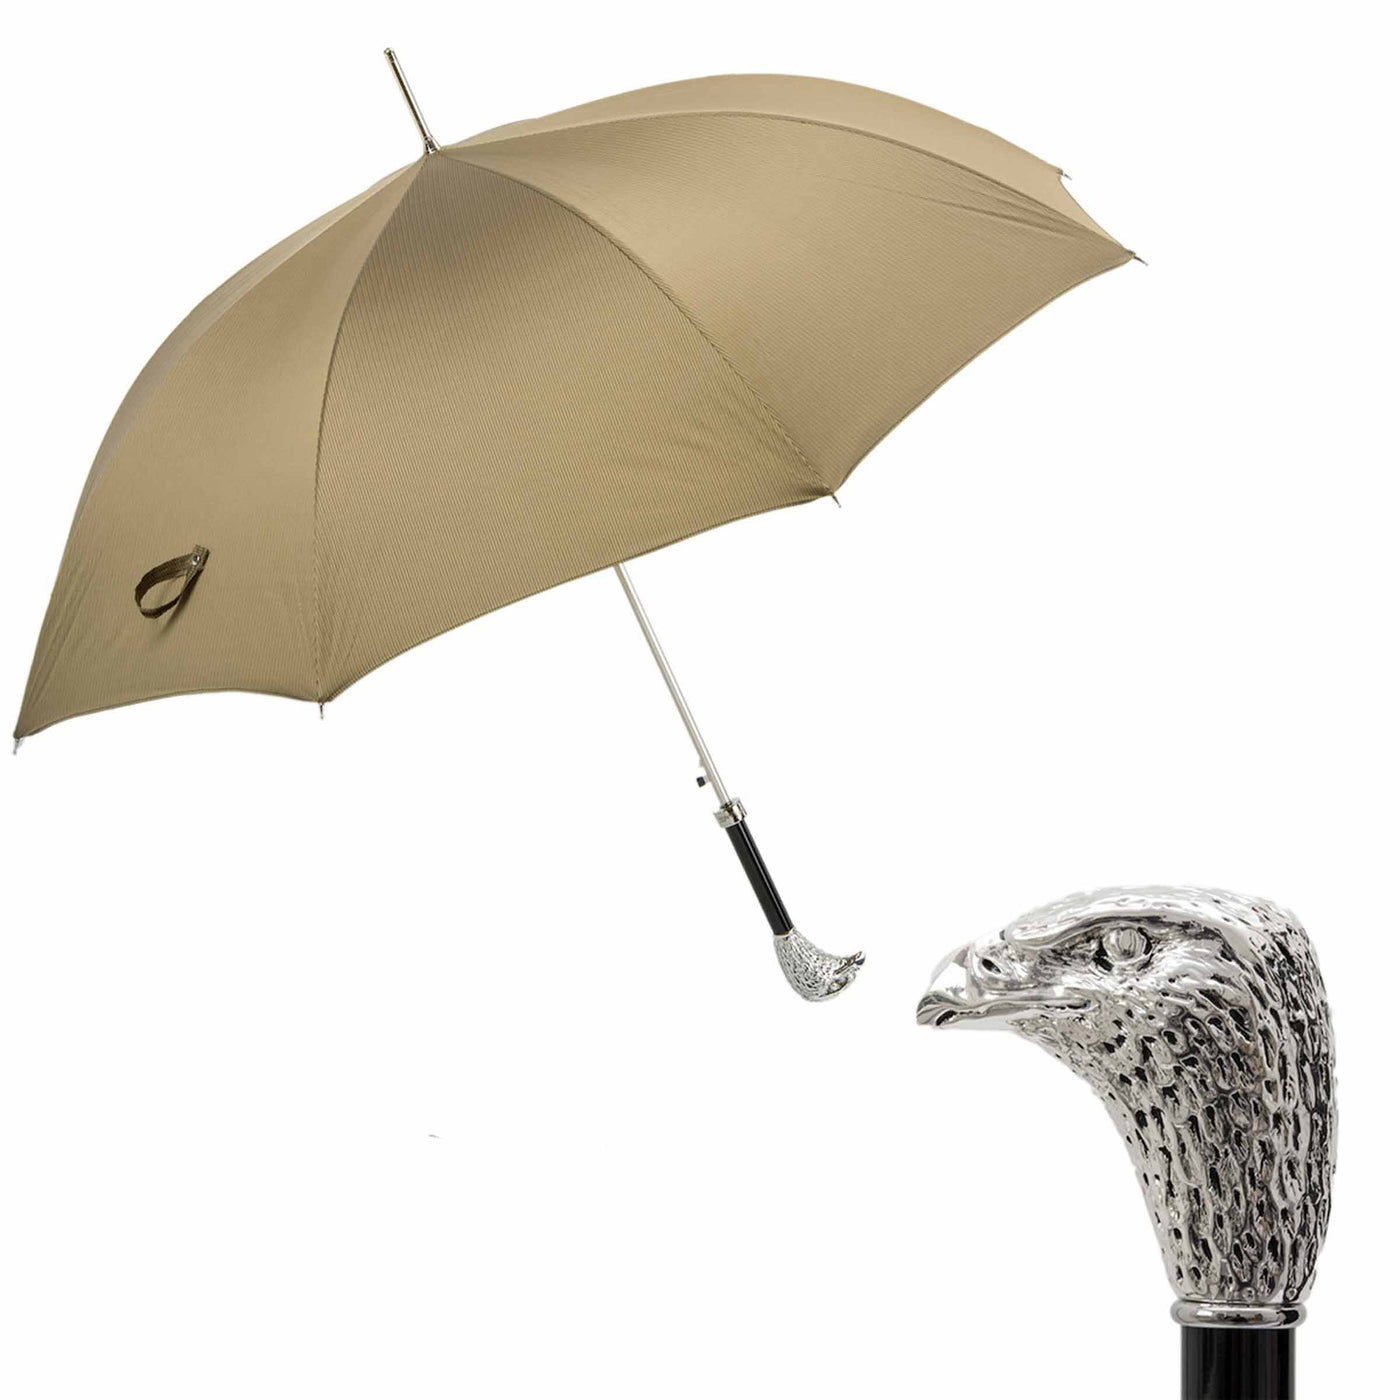 Umbrella SILVER EAGLE with Silver-Plated Resin Handle 01